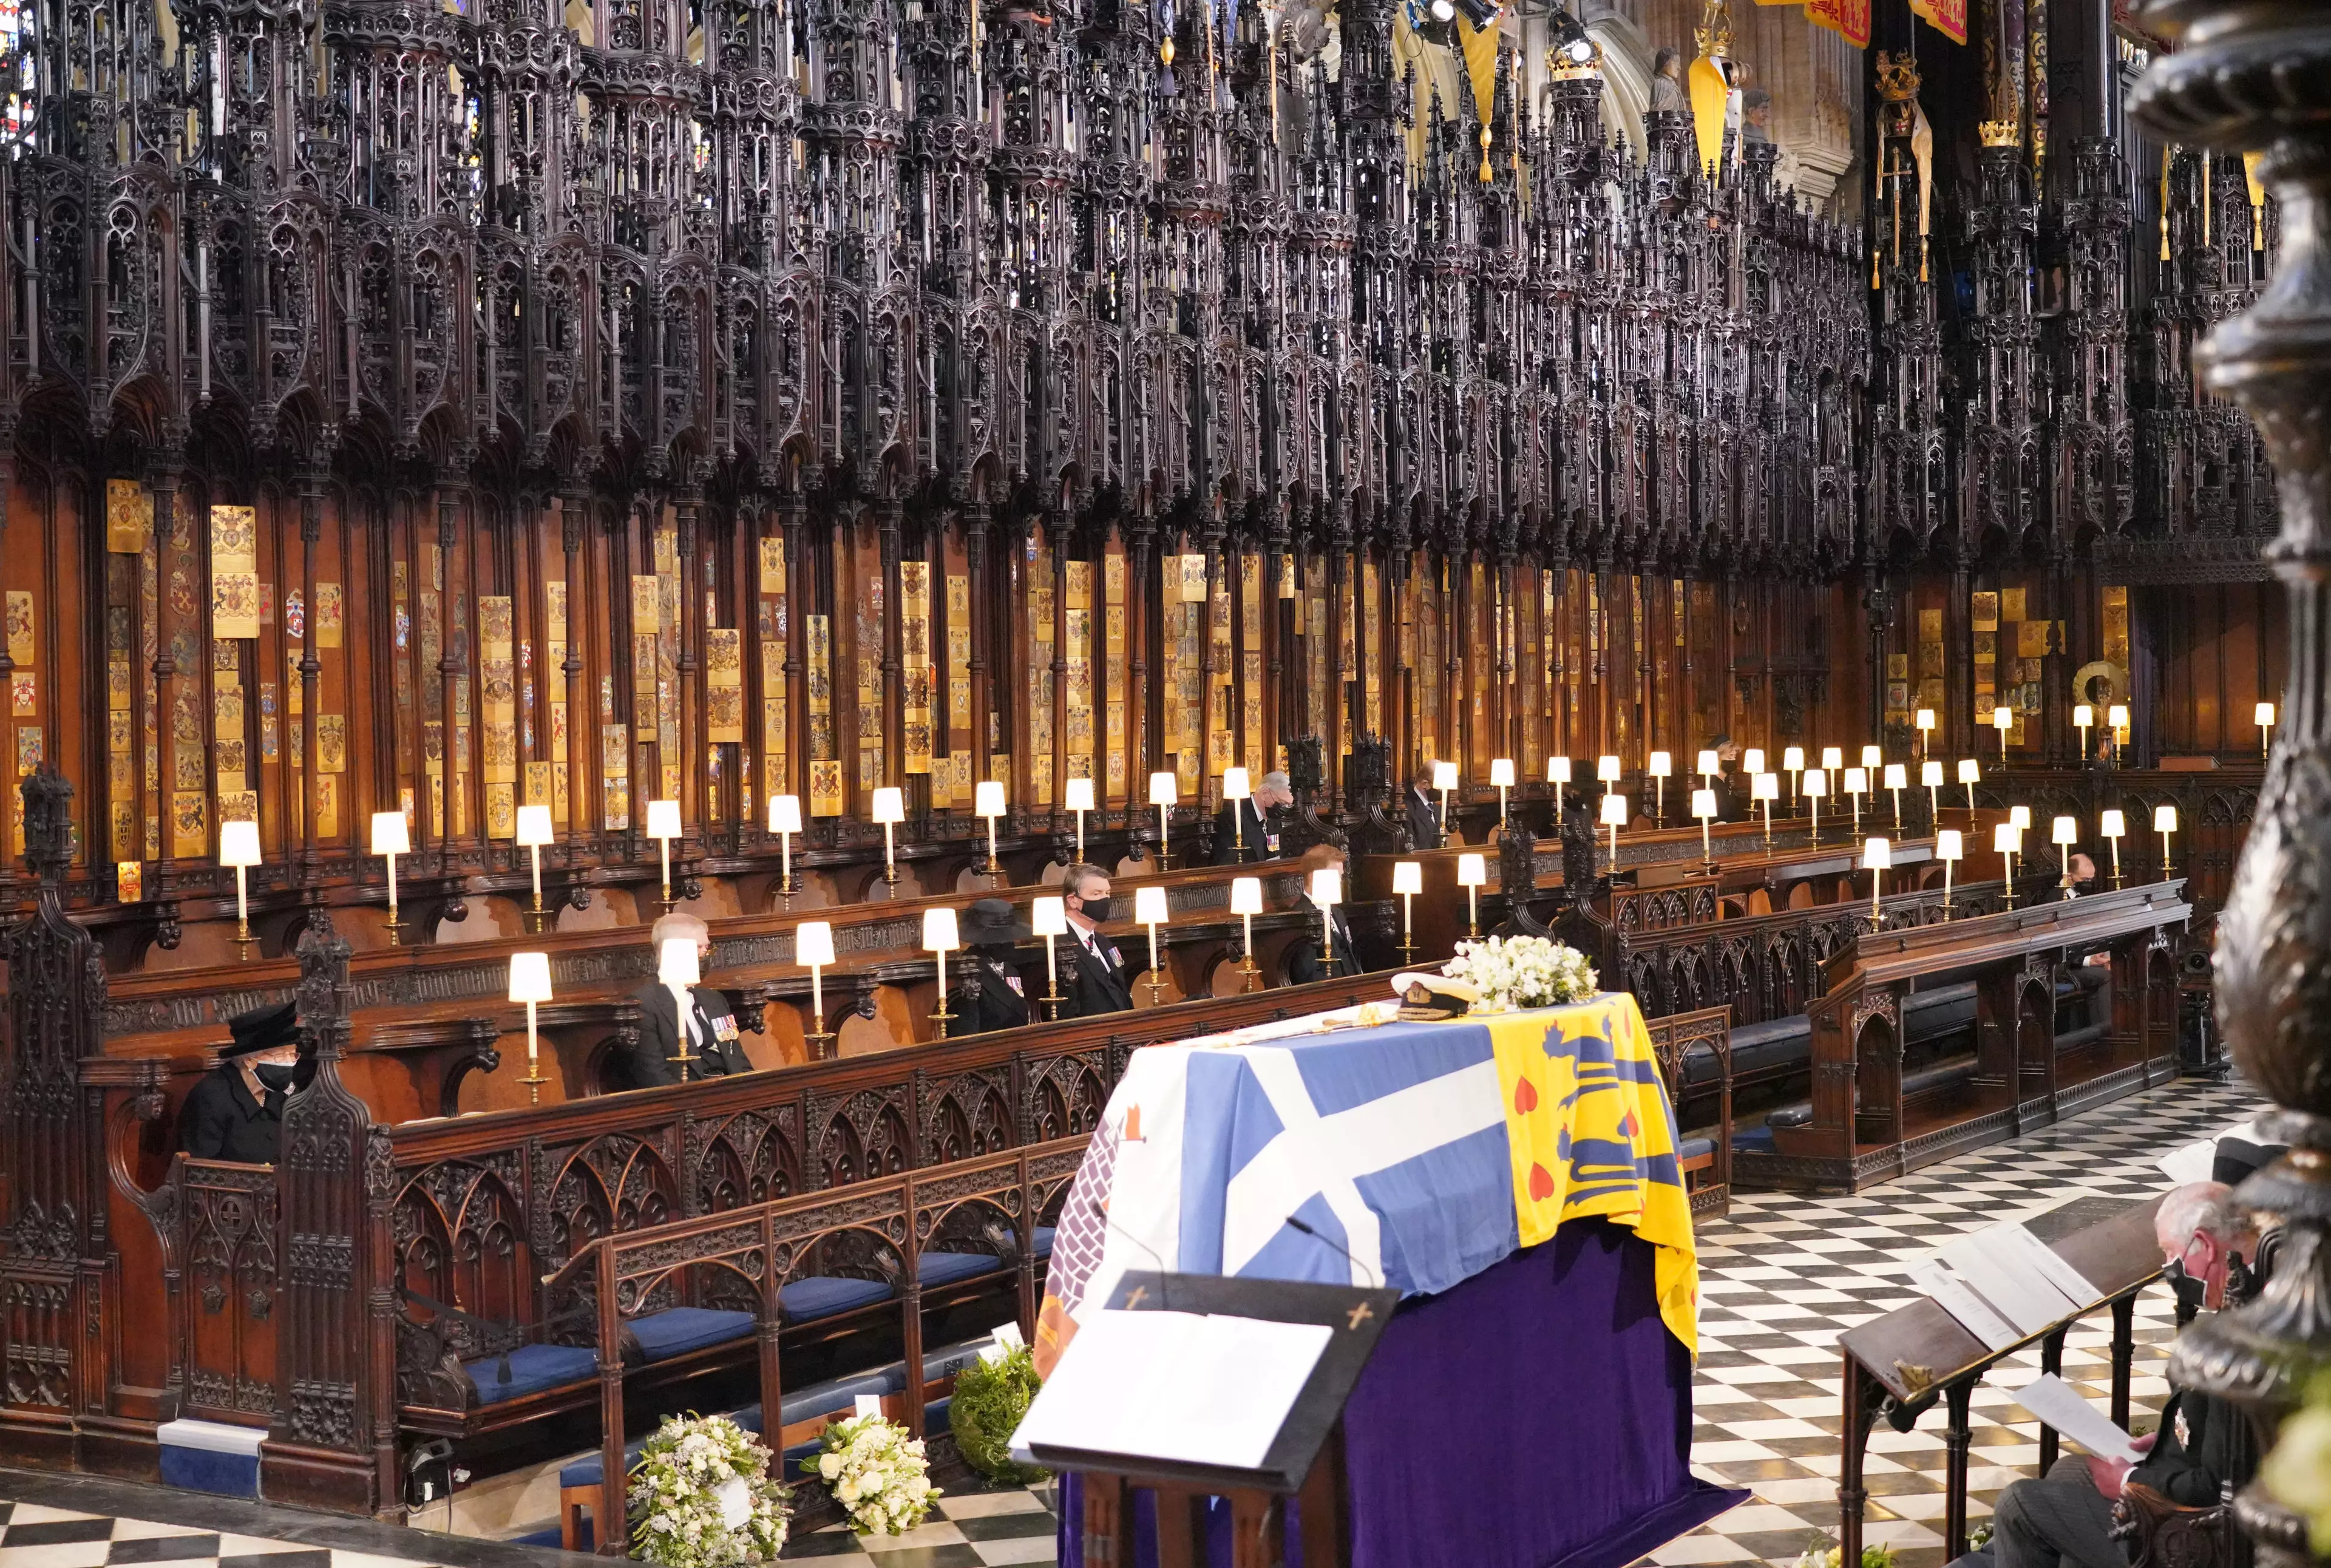 Prince Philip's funeral service at St George's Chapel.